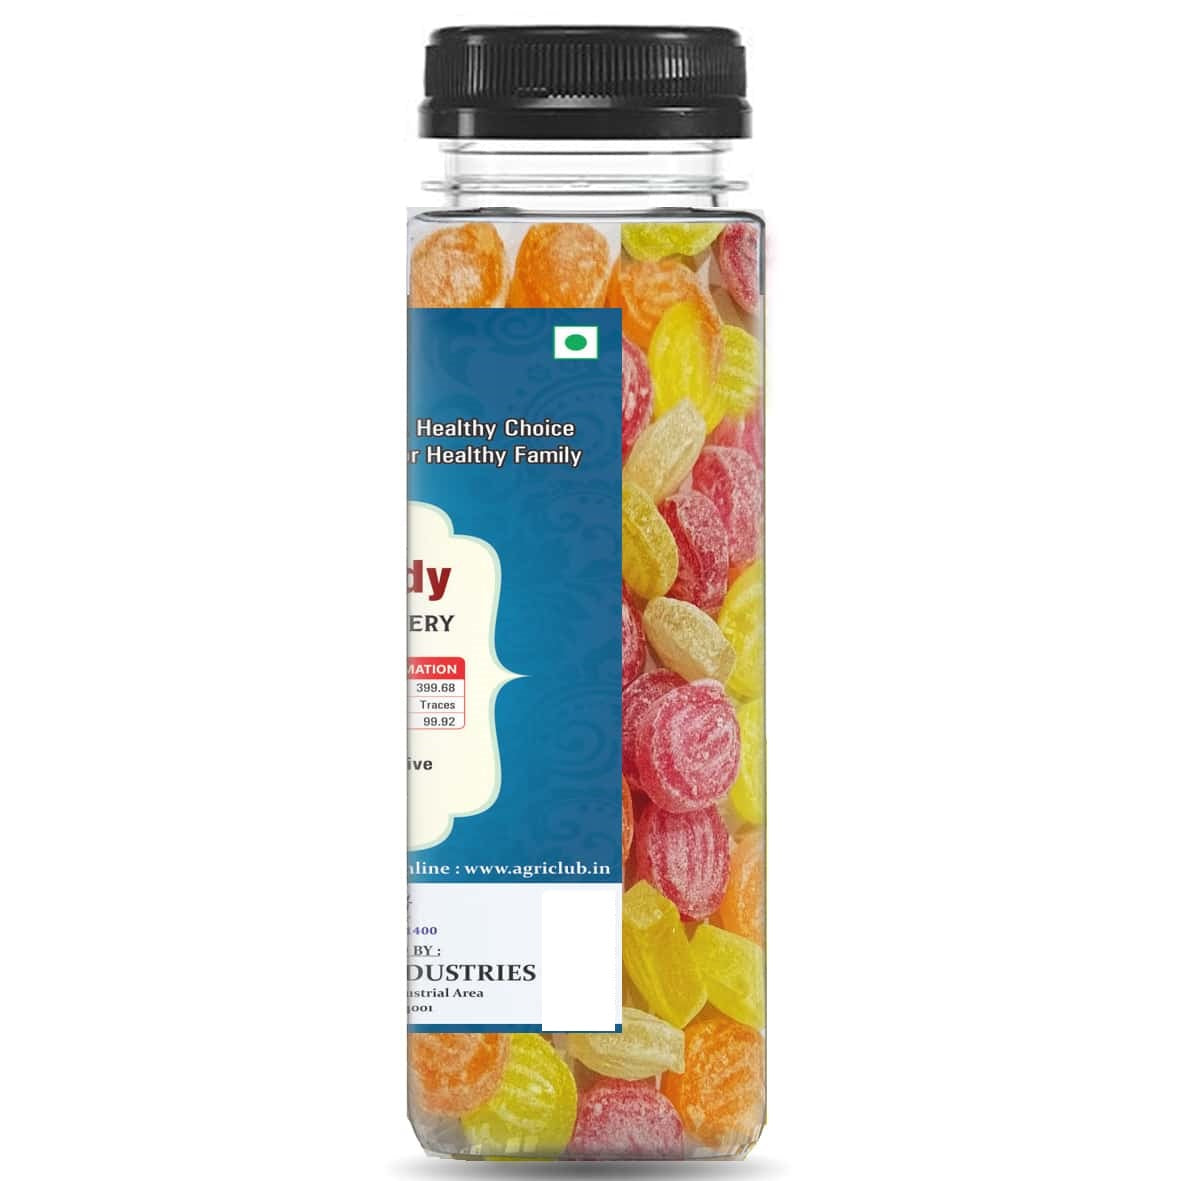 Mix Fruit Candy (Mix Fruit Flavored) 120 Gm (Pack Of 2)